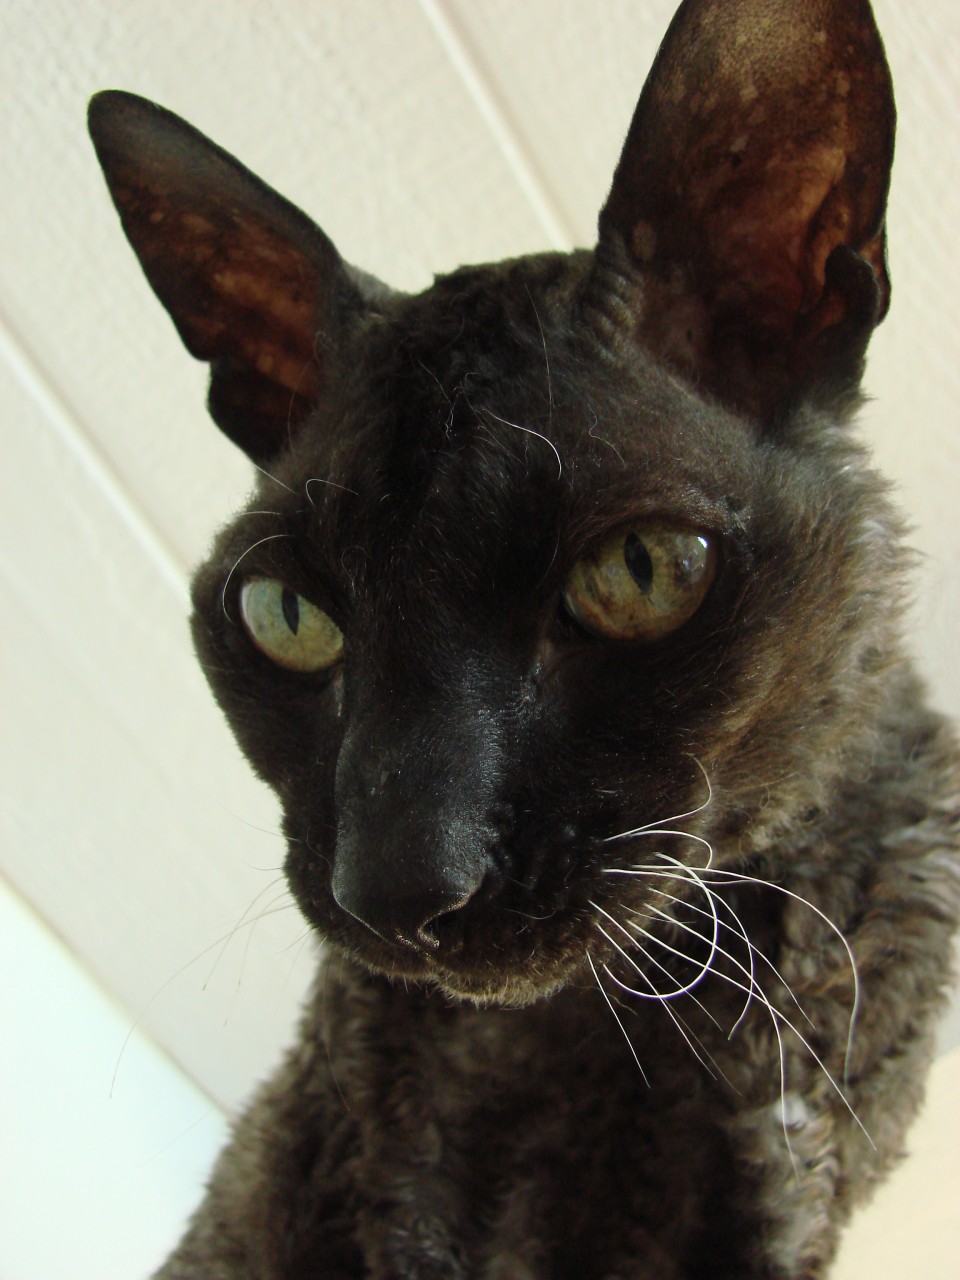 This is Shadow. He is a Cornish Rex rescue from Cat Crossing. He was the youngest cat we ever had. He ruled the house until he was almost 18. His favorite place to hide was on top of the kitchen cabinets.